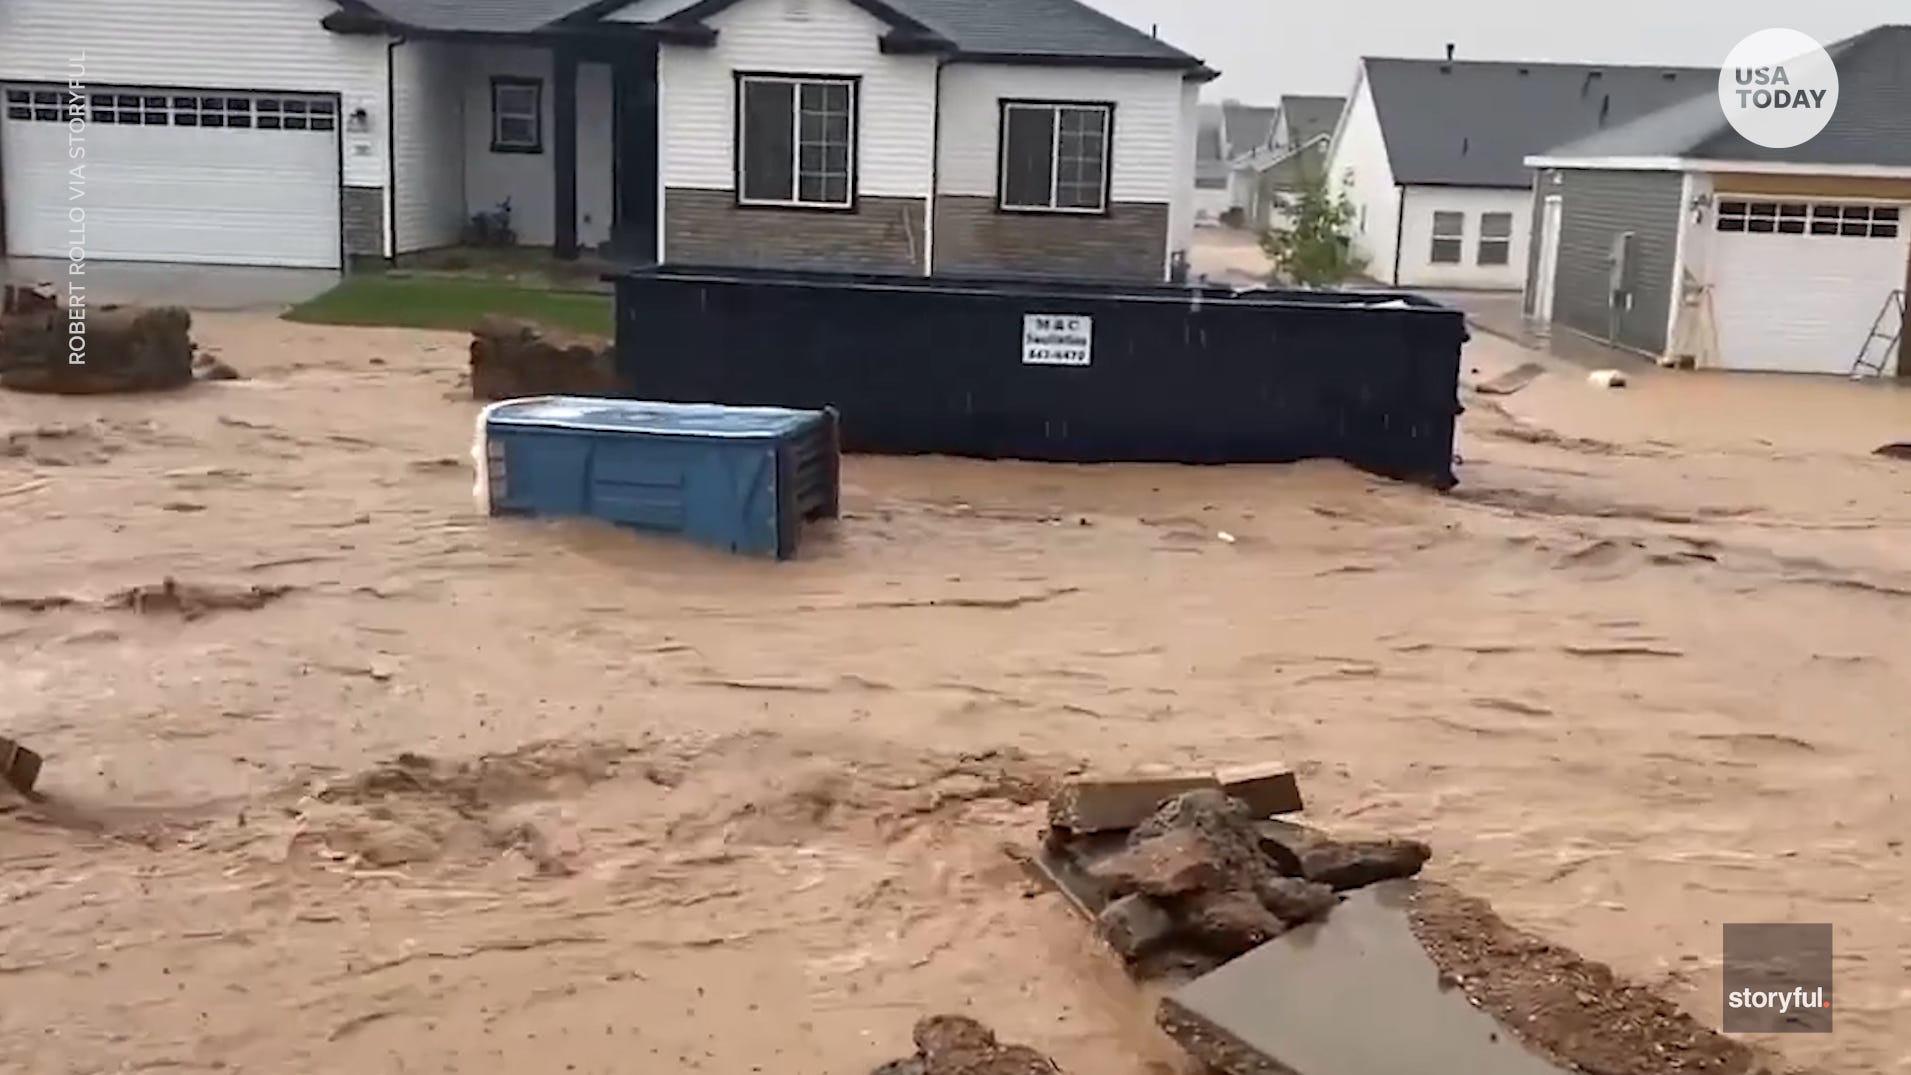 State of emergency in Utah due to intense rain and flash flooding